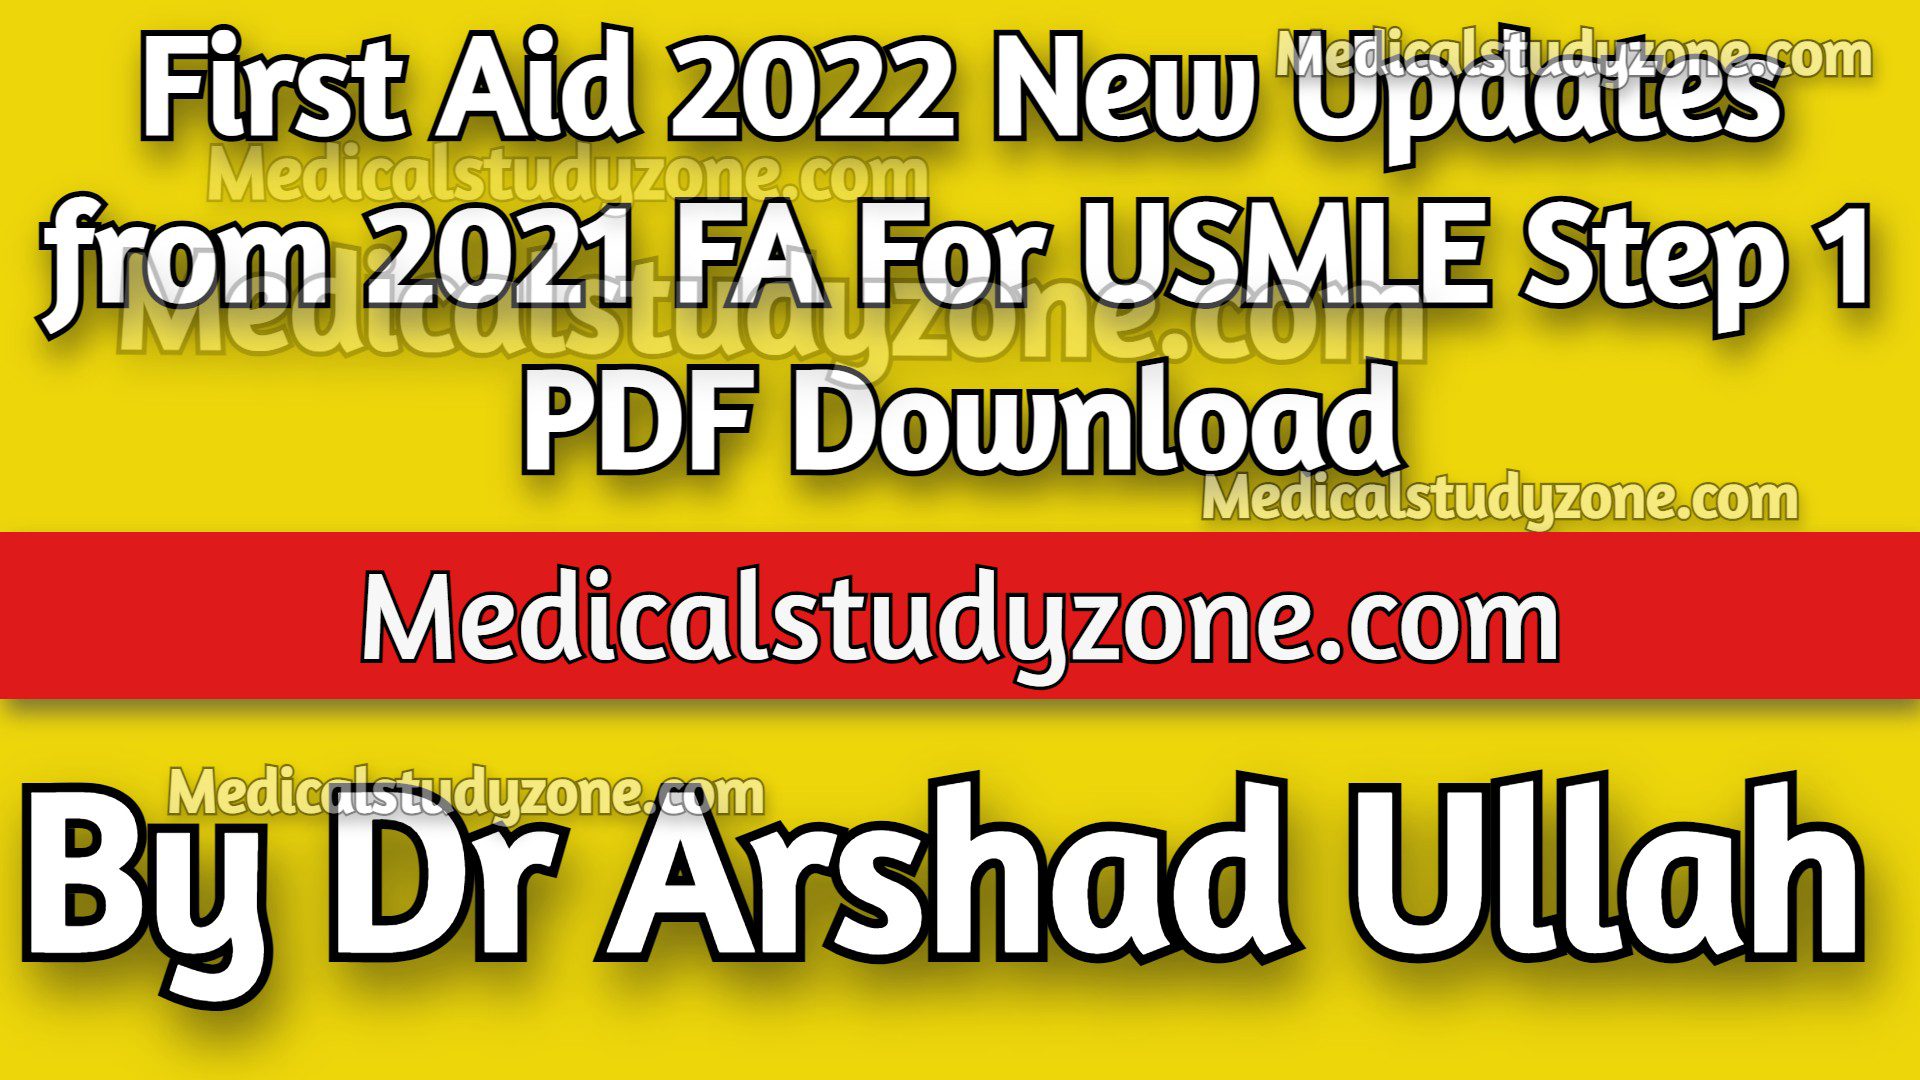 First Aid 2022 New Updates from 2021 FA For USMLE Step 1 PDF Download